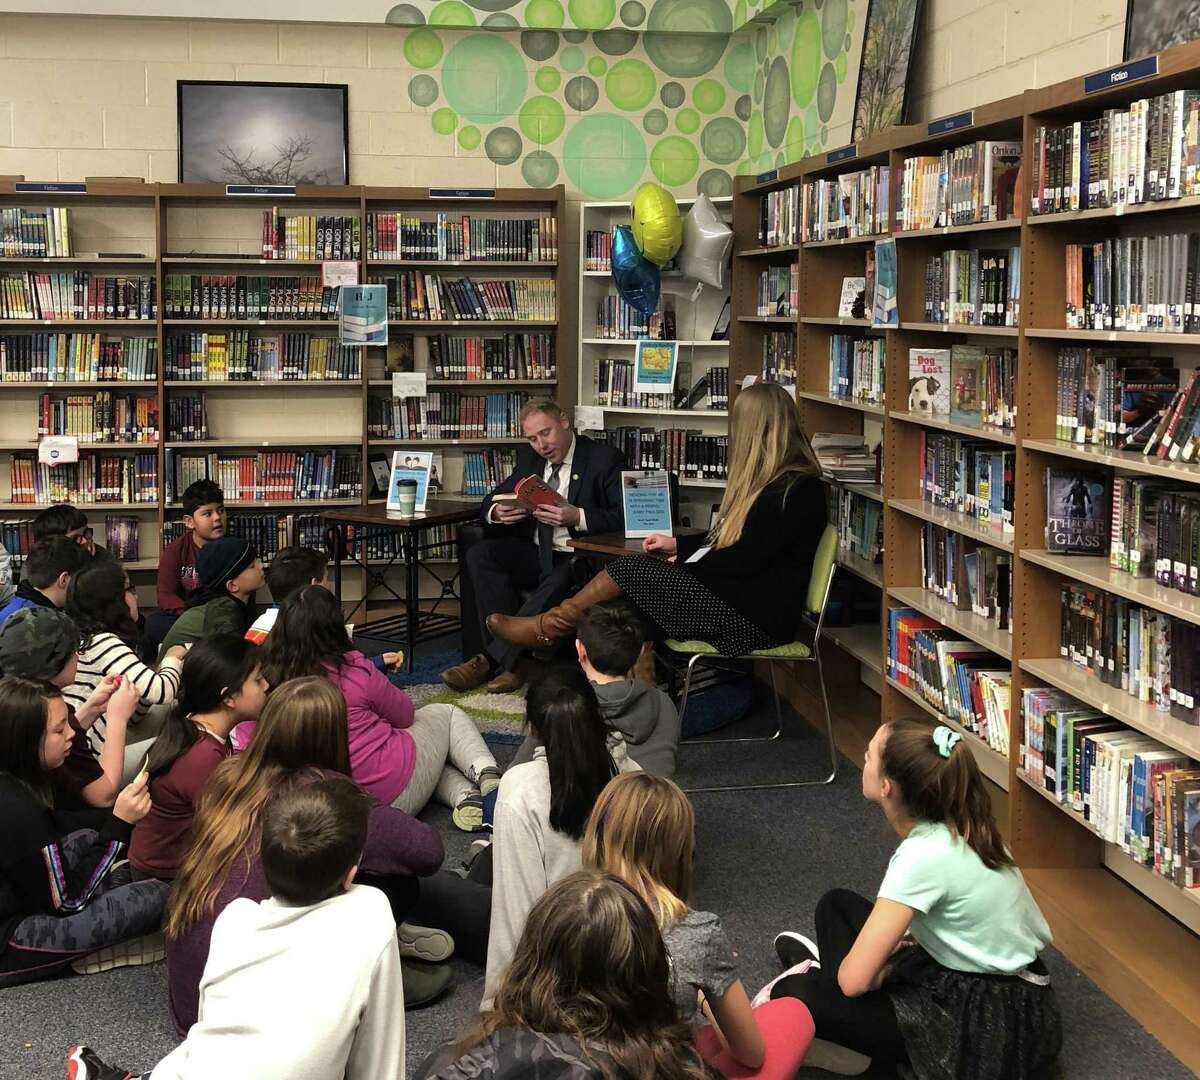 State Rep. Steve Harding, R-Brookfield, and his wife read to students at Bethel Middle School in honor of World Read Aloud Day on Feb. 1. Harding was among several elected officials to participate in the event.